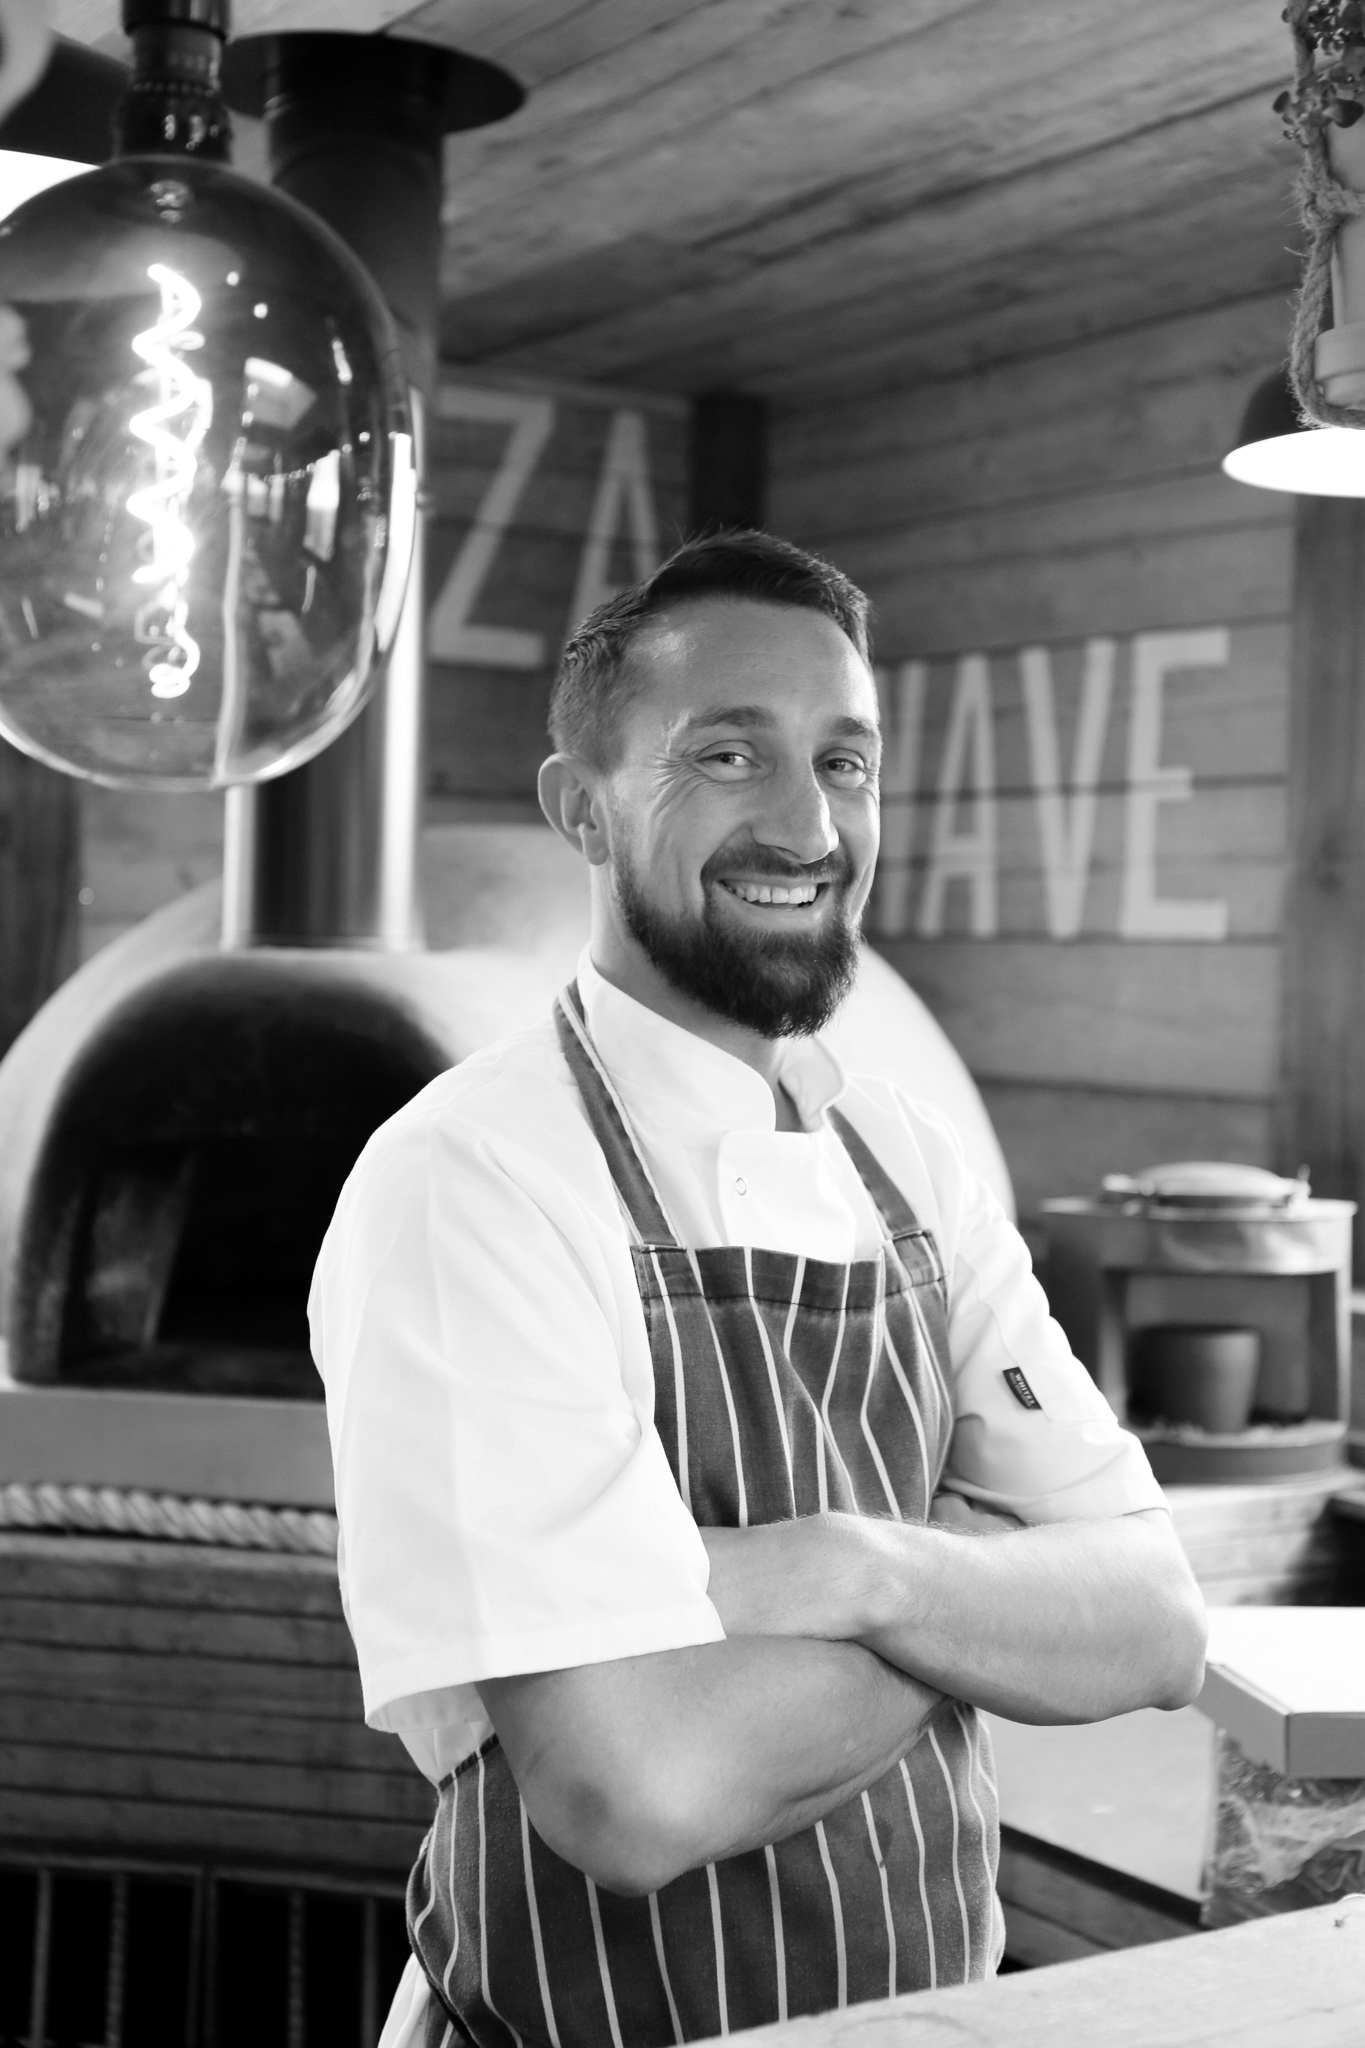 Experienced chef Colin has just been appointed head chef at The Watch House